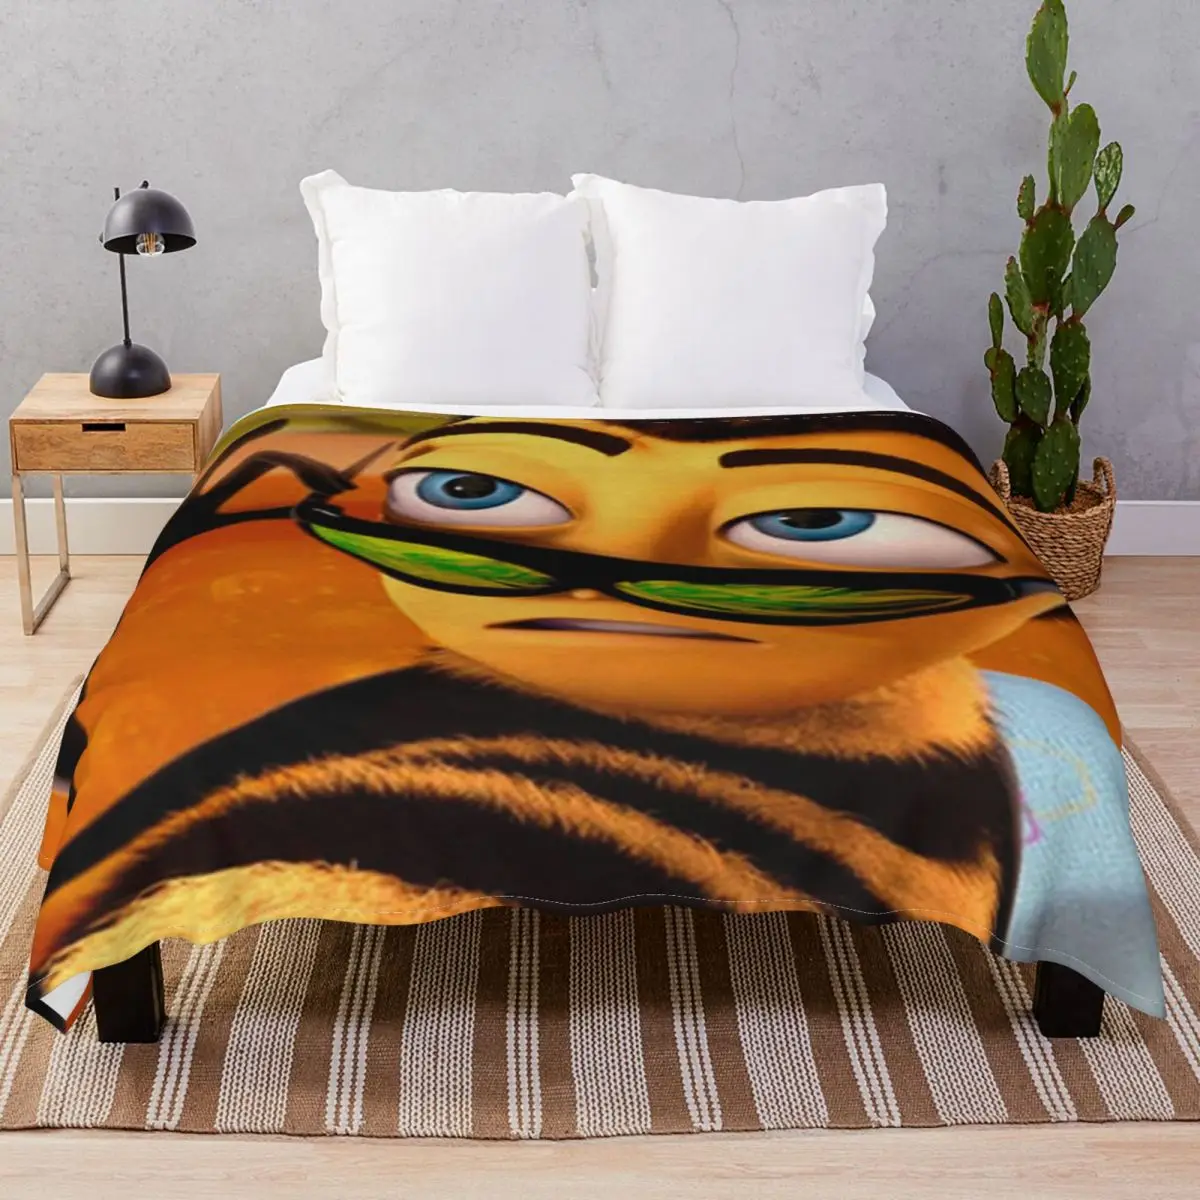 BEE MOVIE Blanket Fleece Spring/Autumn Fluffy Throw Blankets for Bed Sofa Camp Office